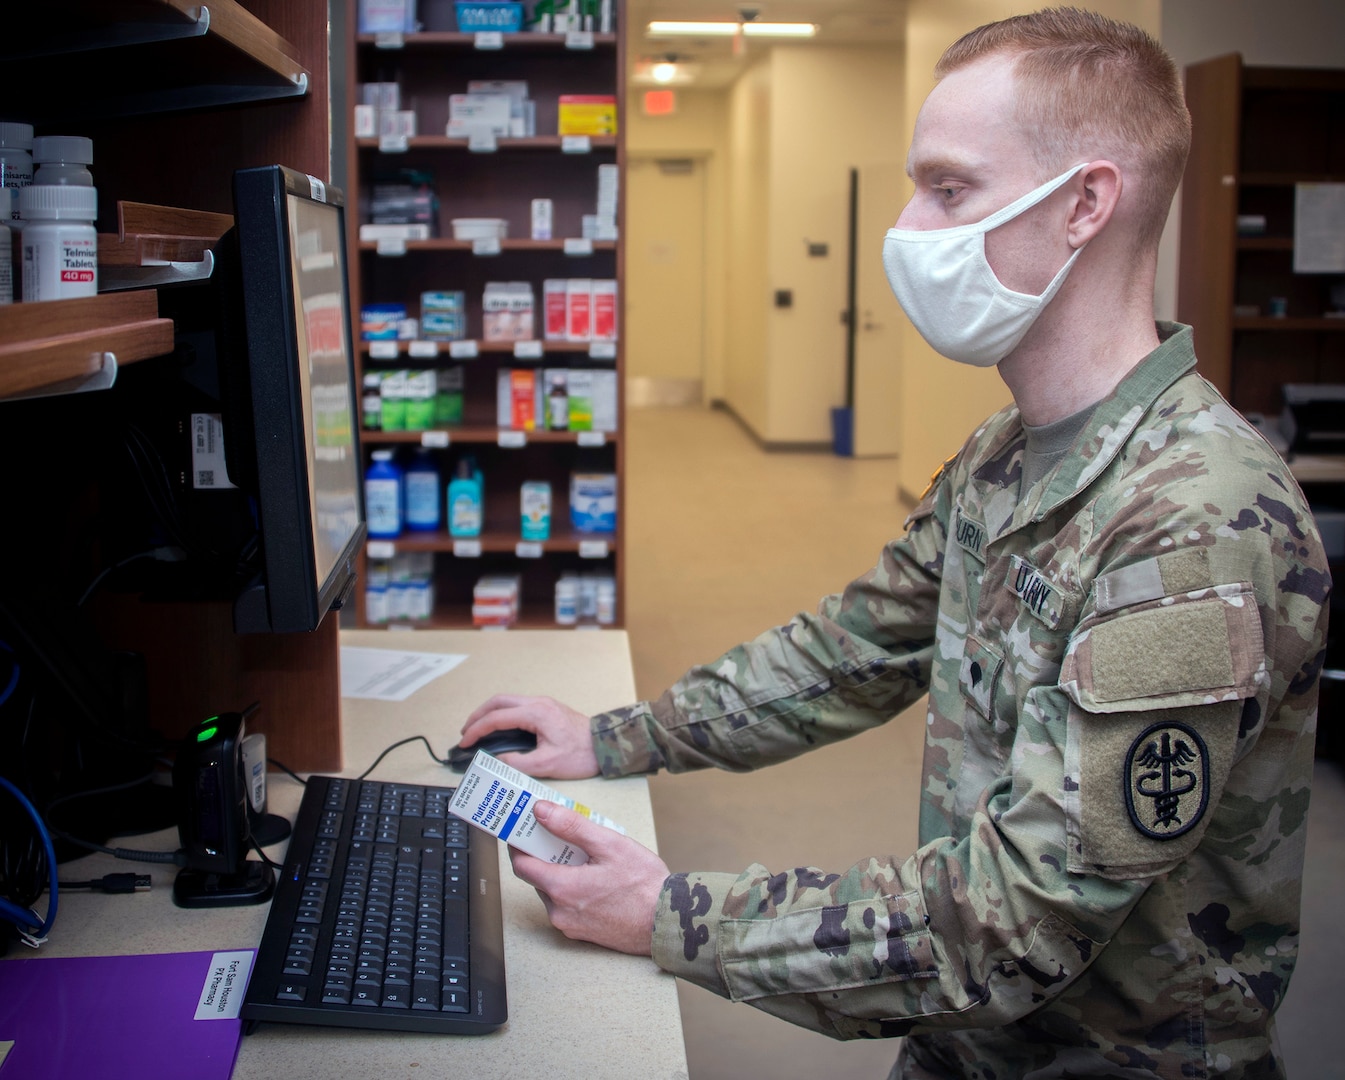 Army Spc. Trevor Osburn, pharmacy technician, fills prescriptions at the Community Pharmacy in the Exchange at Joint Base San Antonio-Fort Sam Houston Feb. 1. The Community Pharmacy fills an average of 330 new prescriptions and 1,440 refills daily.